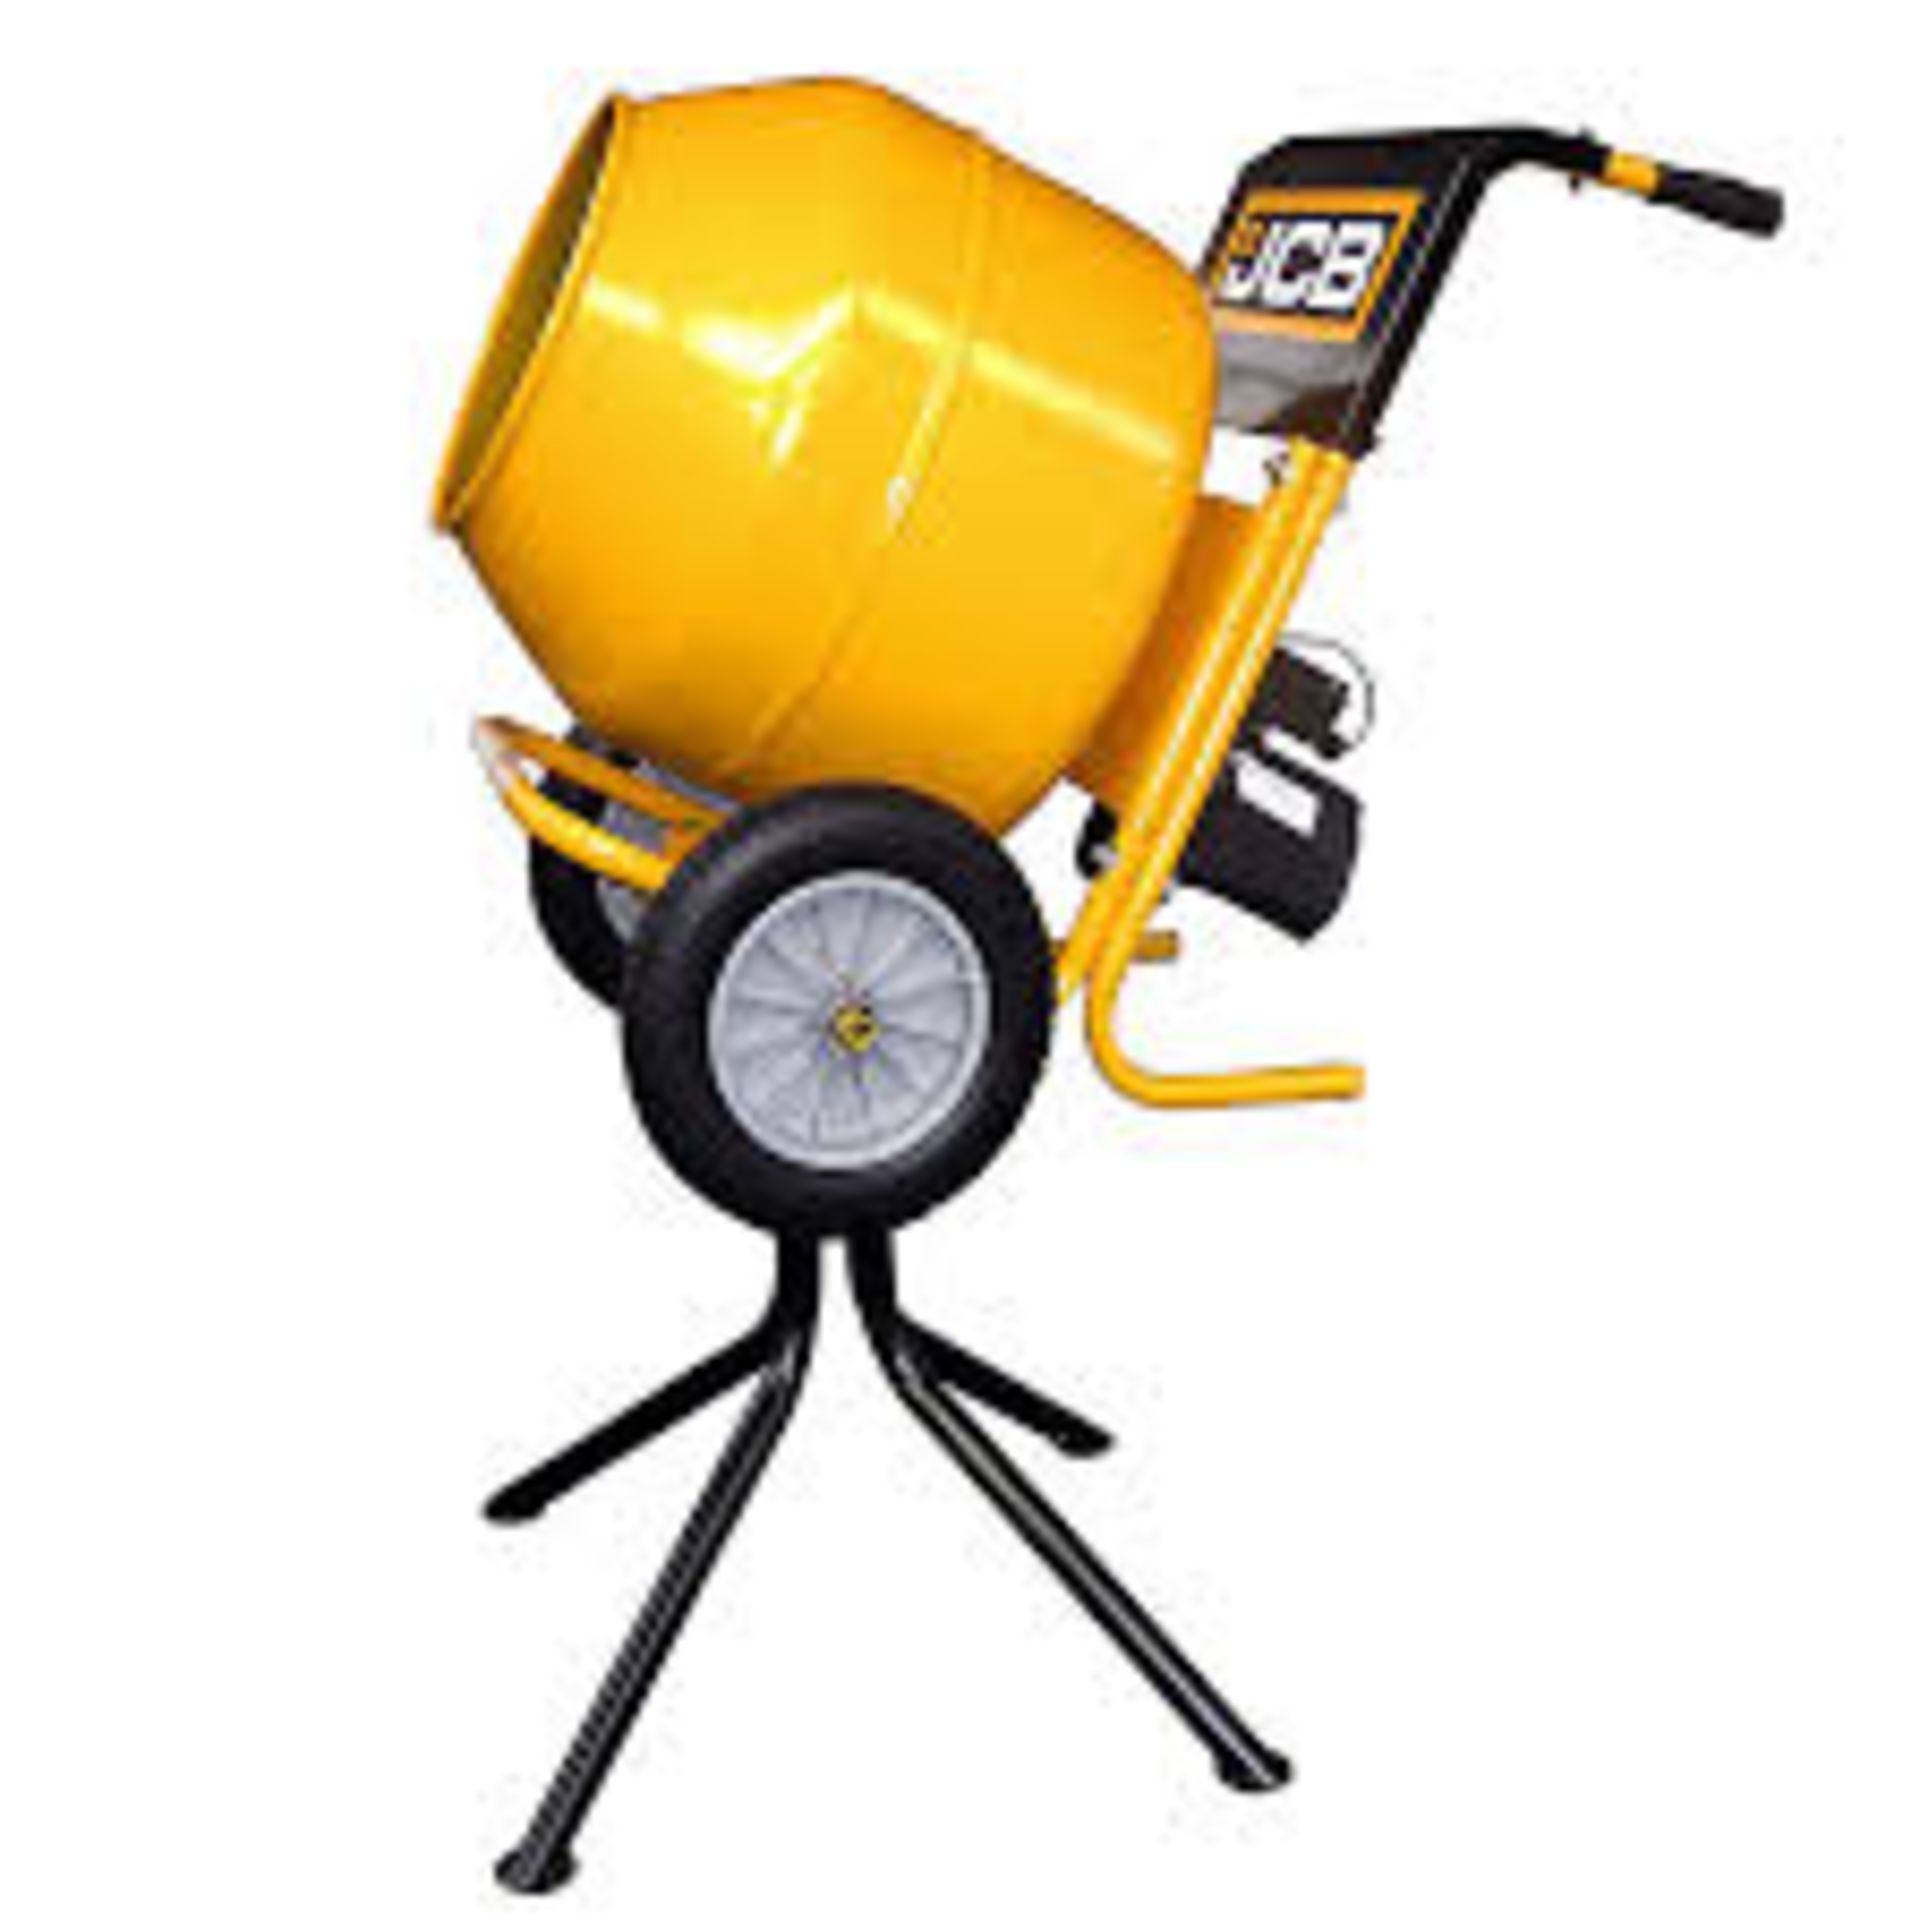 JCB 370W 230V Cement mixer 134L. - R19.6. This corded cement mixer and a motor power of 370 W giving